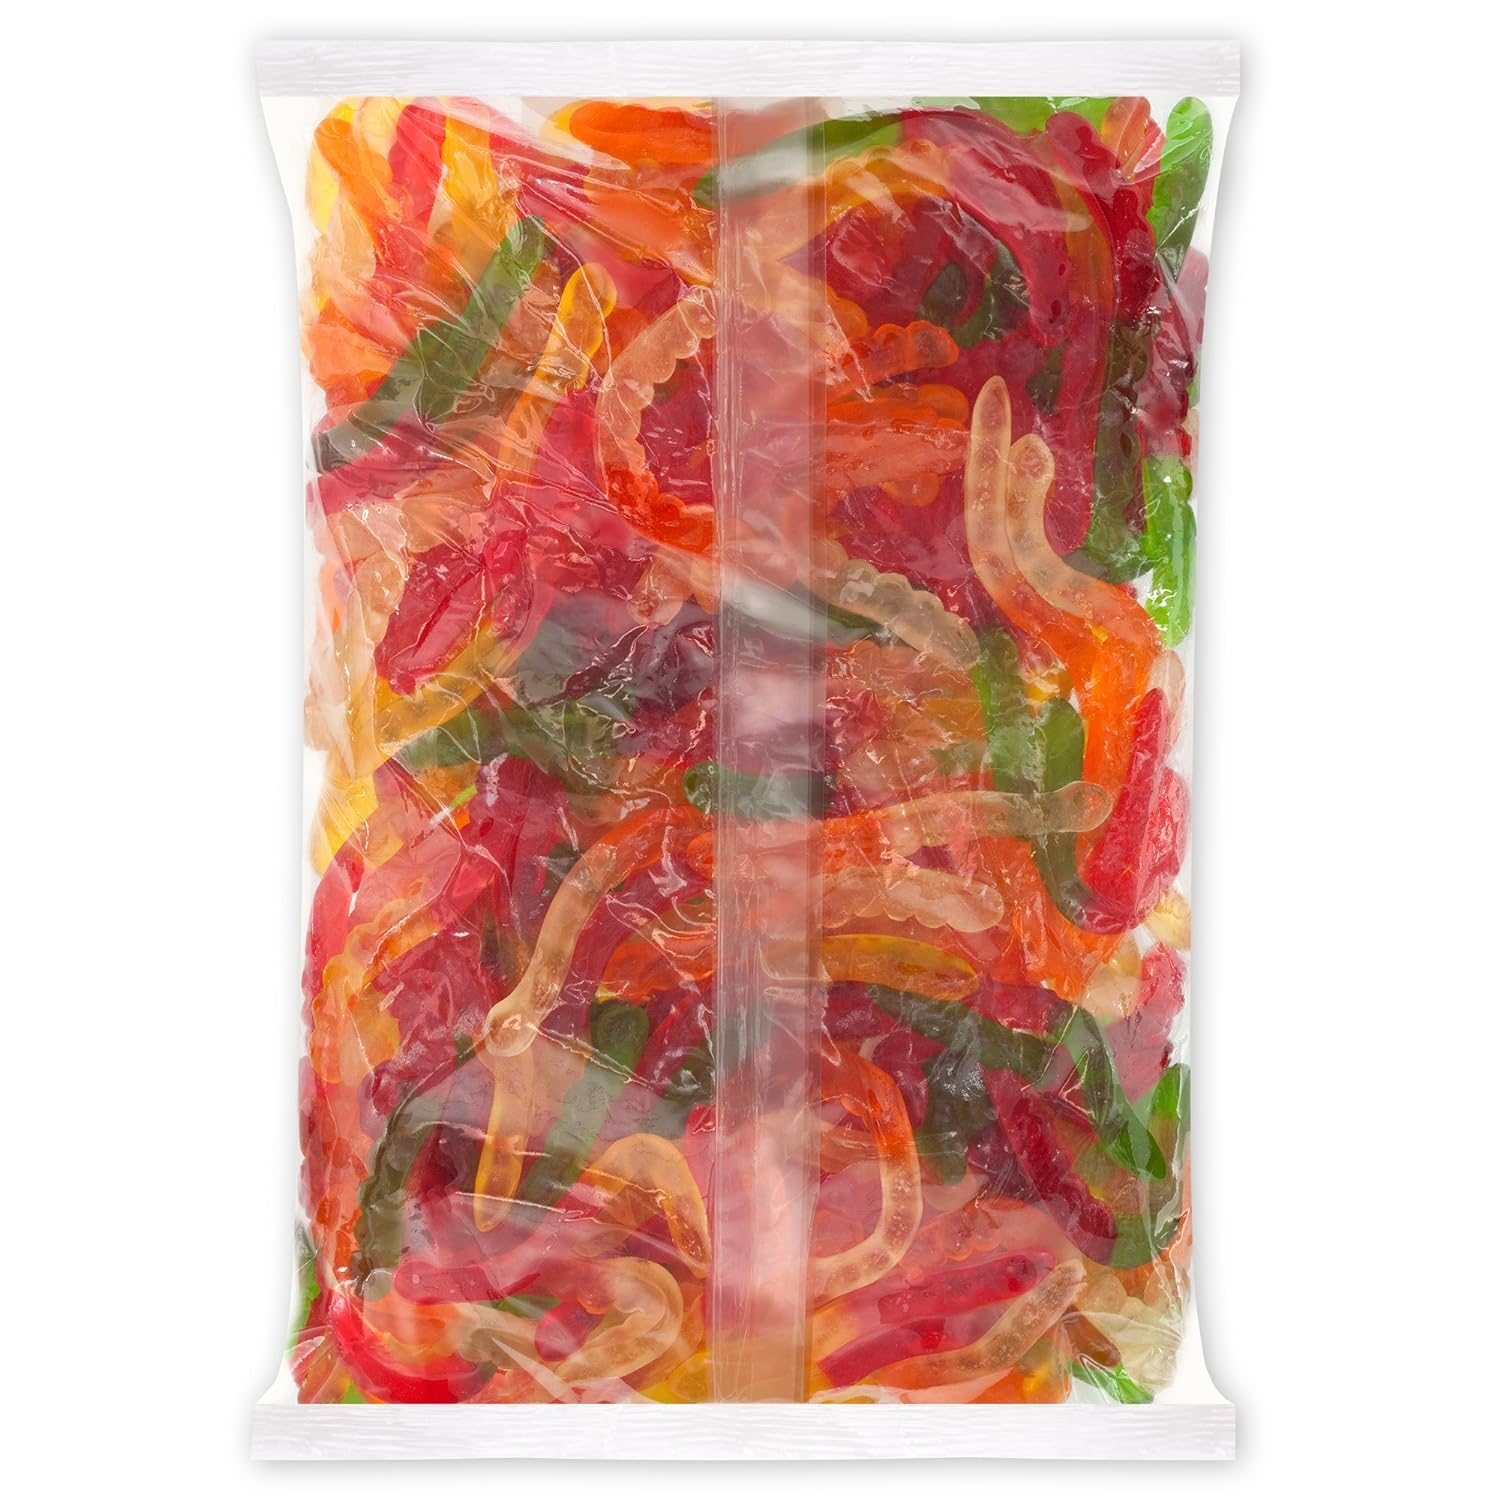 Albanese World's Best Large Assorted Fruit Gummi Worms, 5lbs of Easter Candy, Great Easter Basket Stuffers